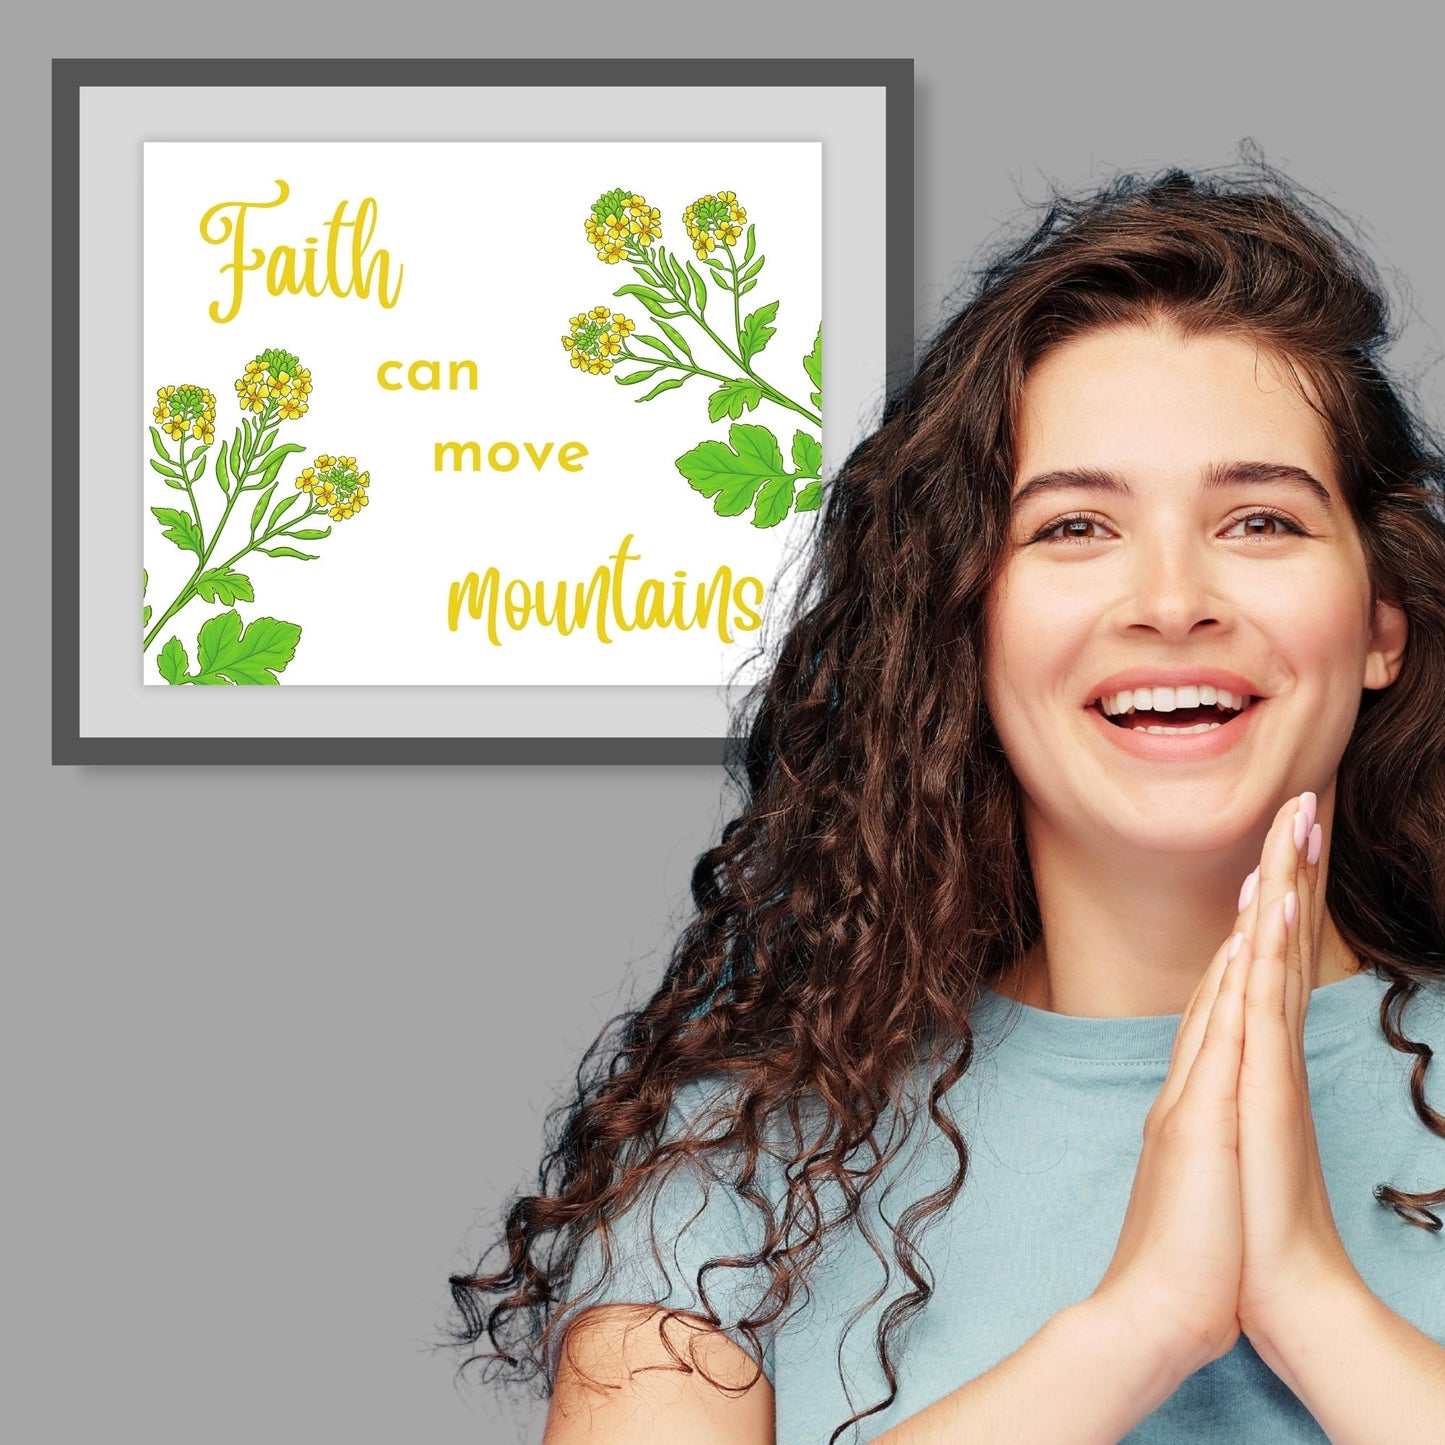 Inspirational Word Art - Faith can move mountains - Mustard Seed Floral Design Wall Decor (8x10 print) | shown in wood frame with neutral mat board next to faithful girl | oak7west.com